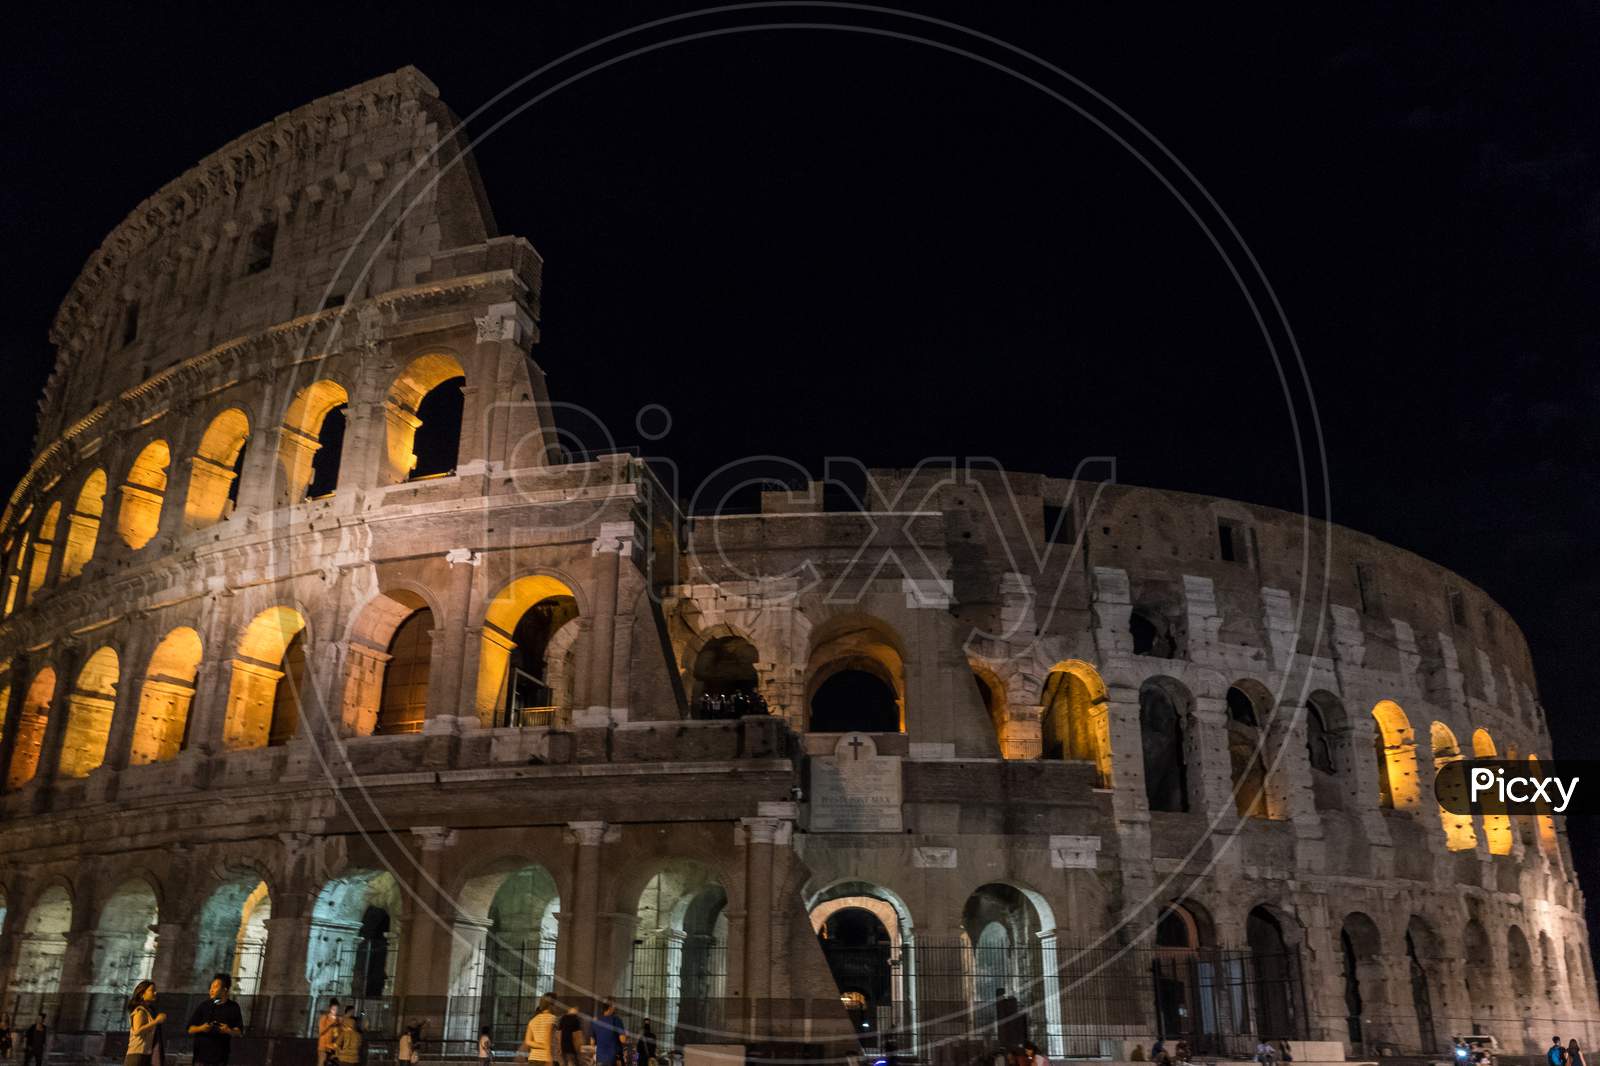 Rome, Italy - 24 June 2018: Night At The Great Roman Colosseum (Coliseum, Colosseo), Also Known As The Flavian Amphitheatre With Lights & Illumination.